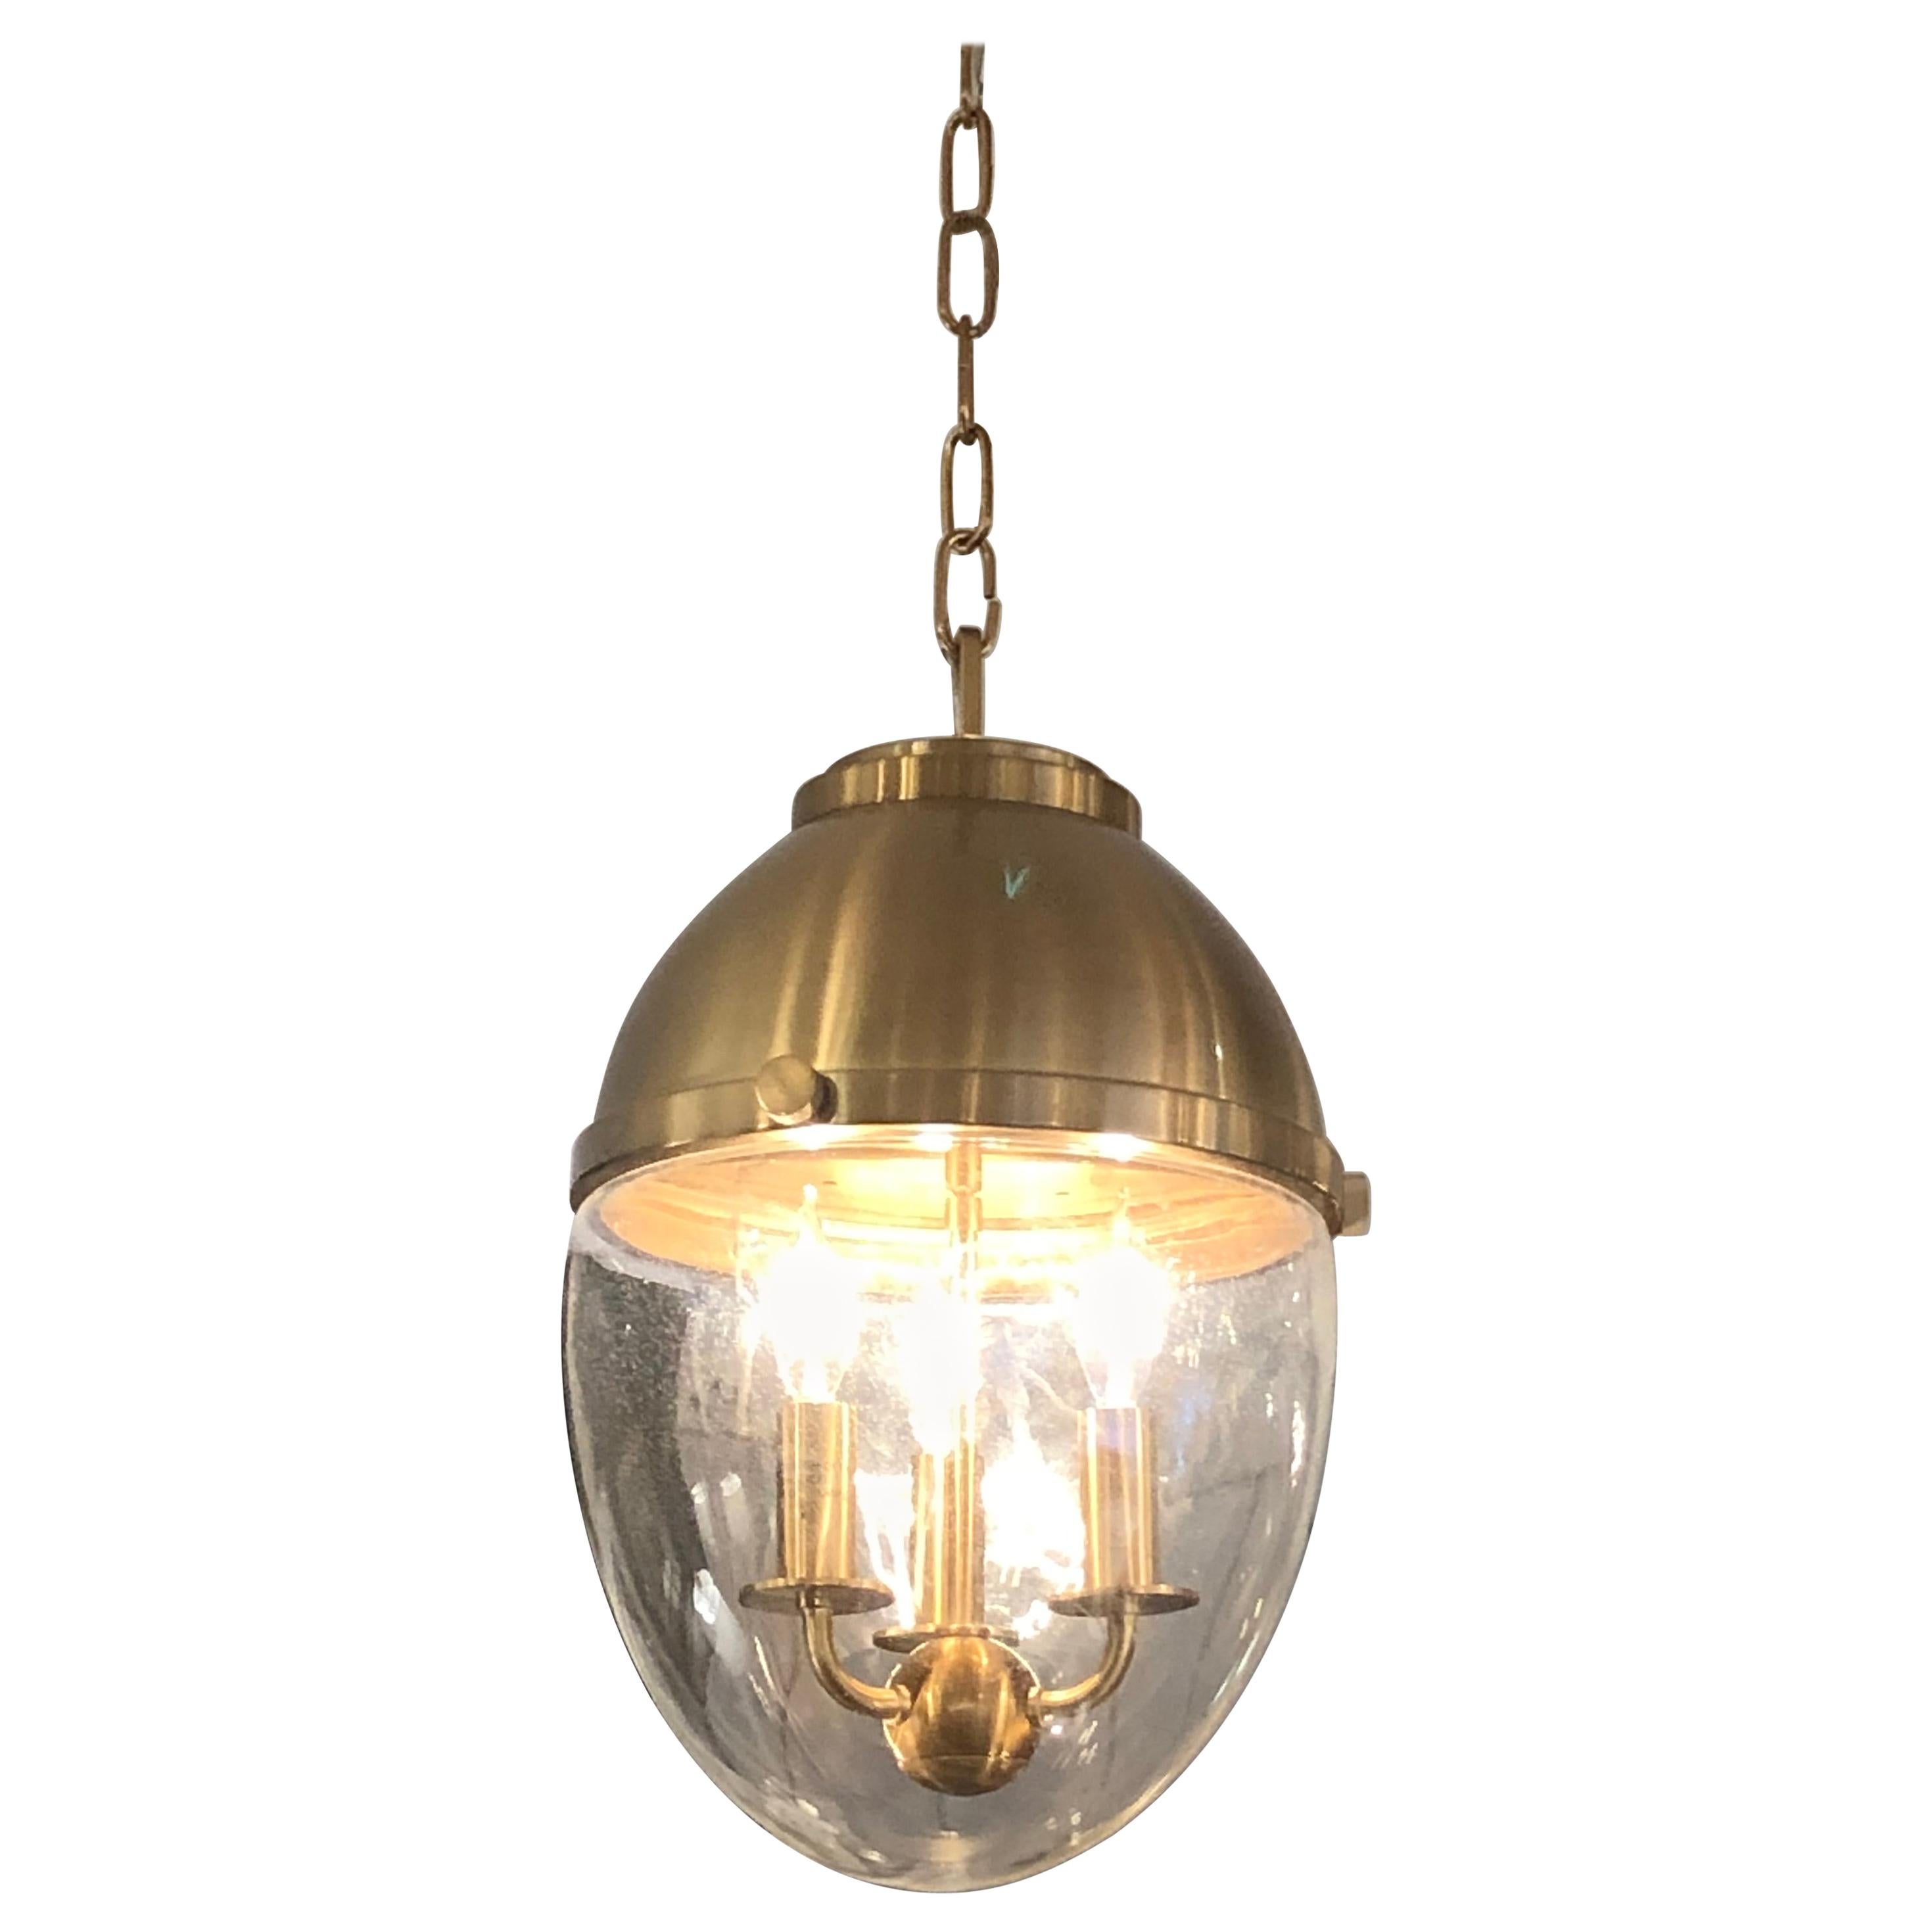 Stylish Brass and Glass Egg Shaped Pendant Chandelier For Sale